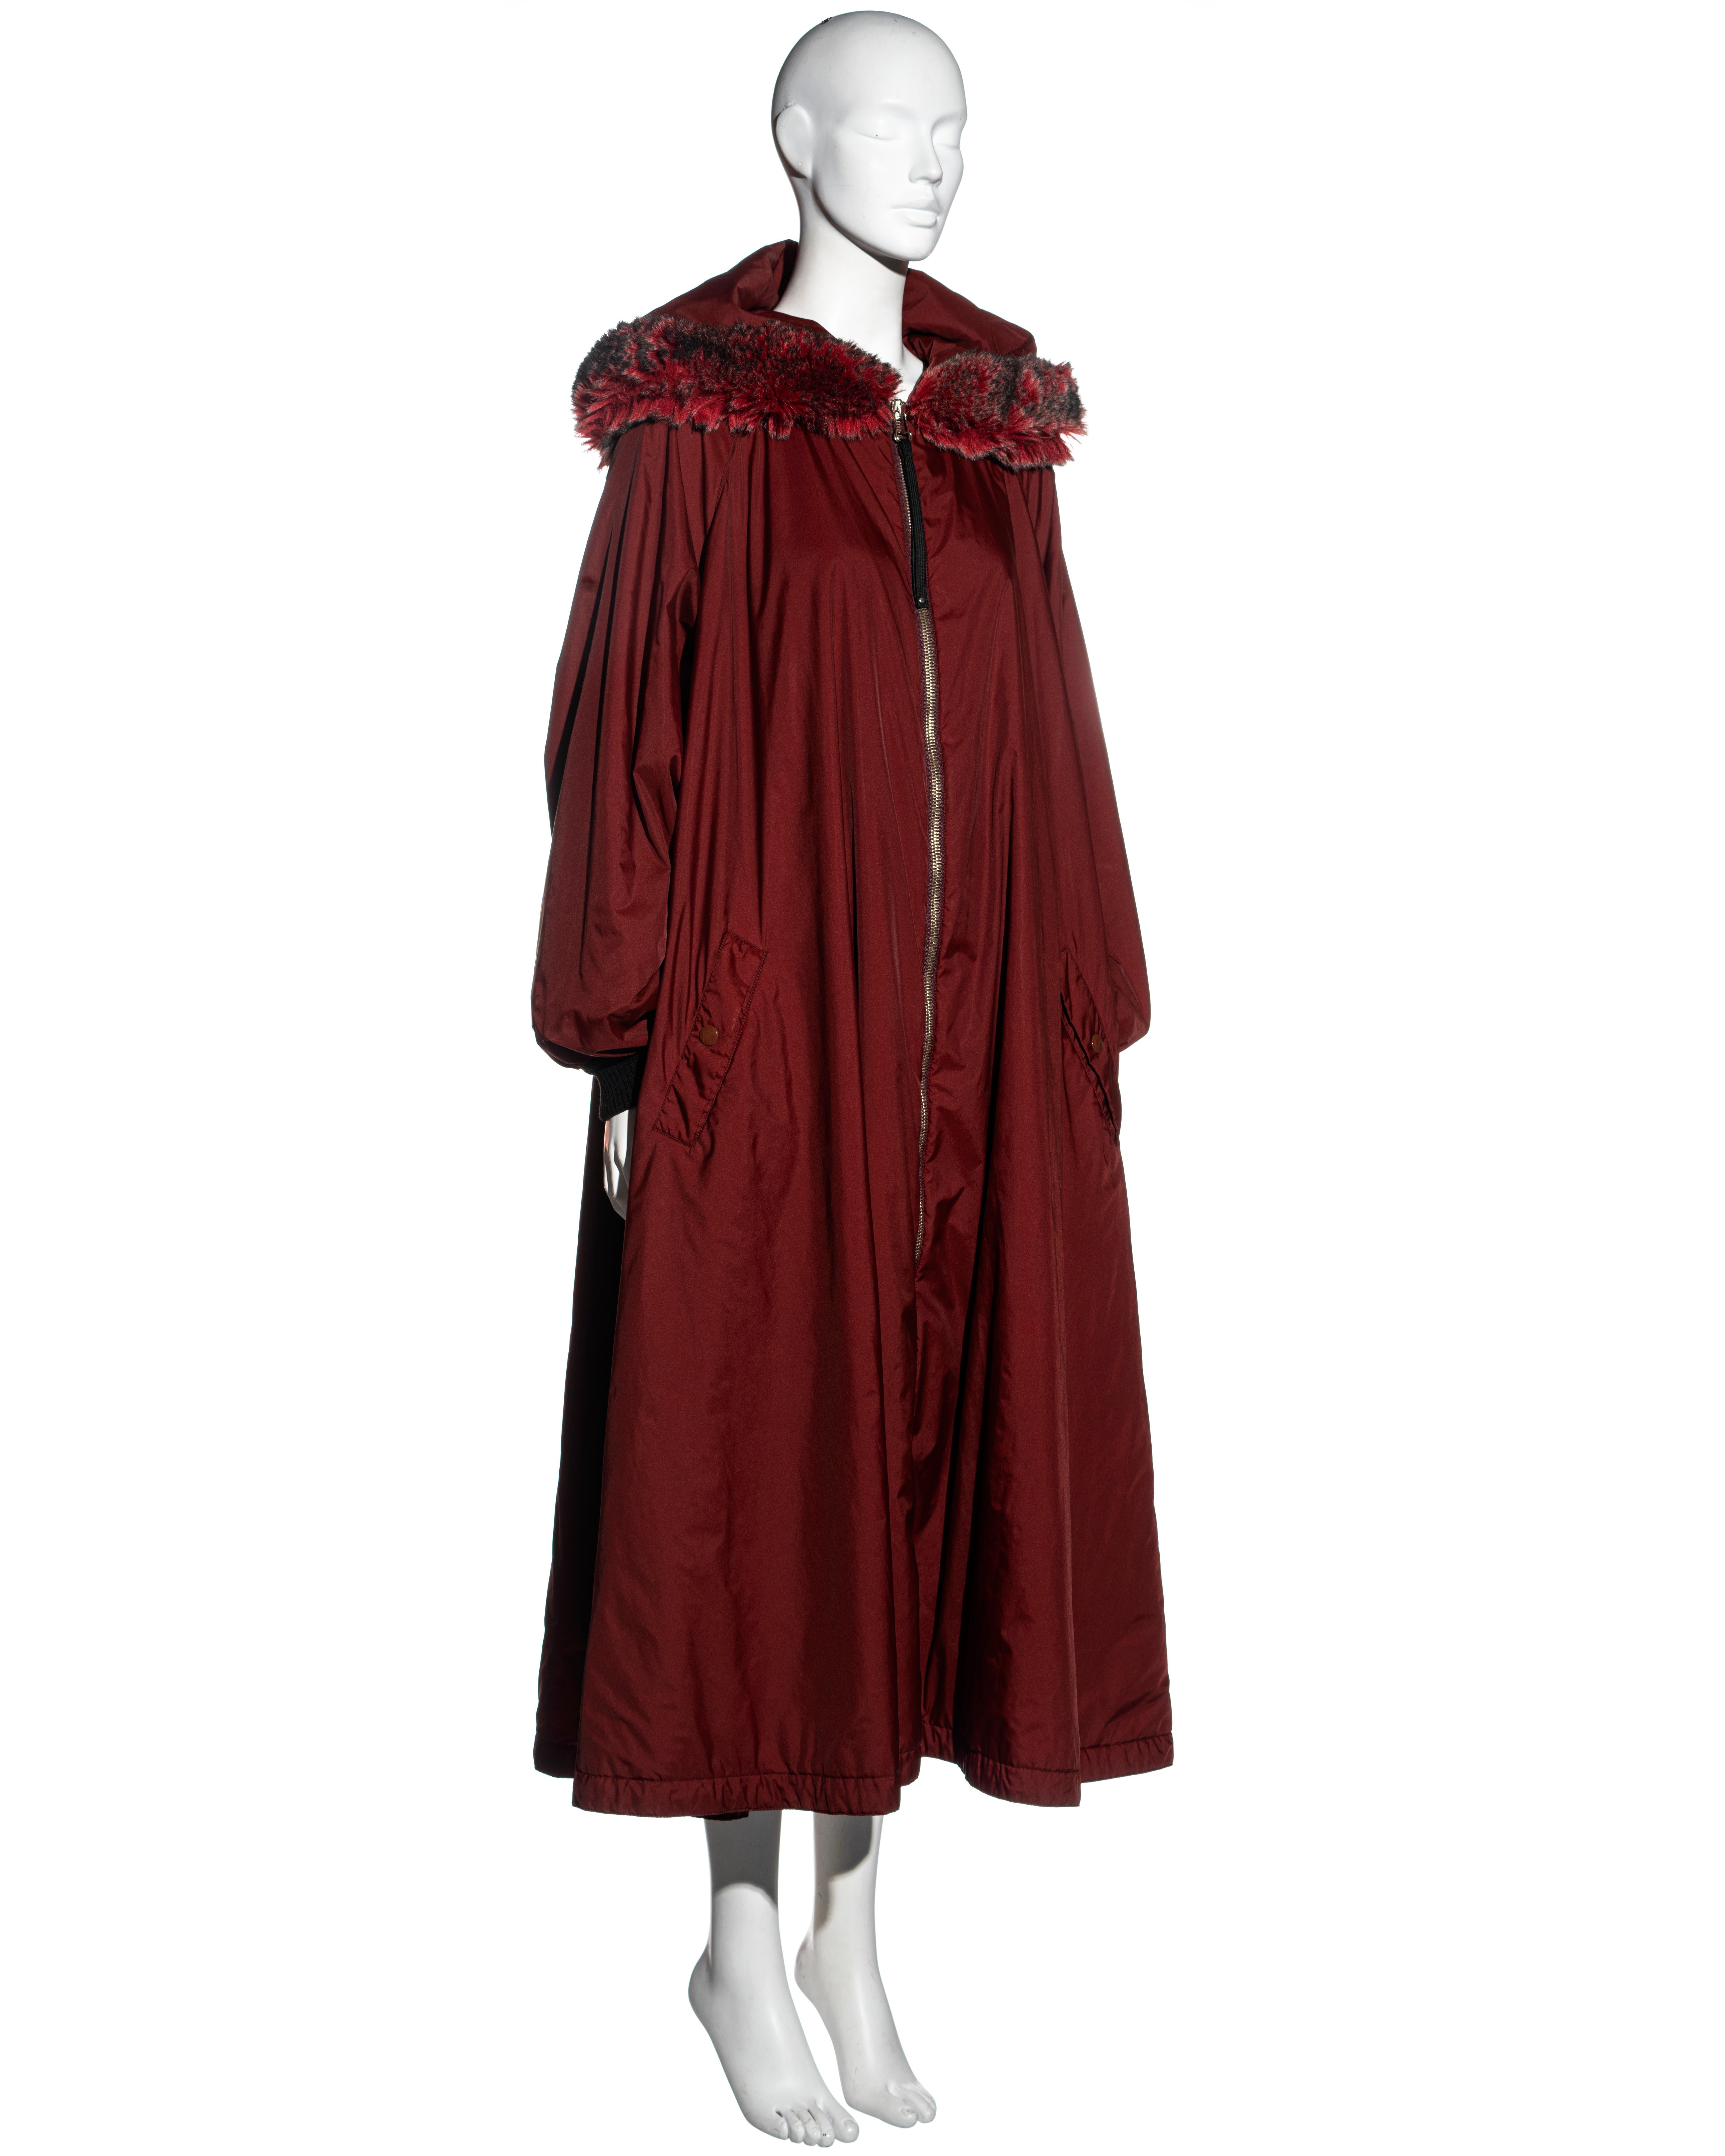 ▪ Jean Paul Gaultier burgundy nylon puffer coat dress
▪ Oversized pointed hood with faux fur trim
▪ Metal zipper at the center front opening 
▪ Two front pockets 
▪ Elasticated cuffs 
▪ IT 42 - FR 38 - UK 10
▪ Fall-Winter 1995